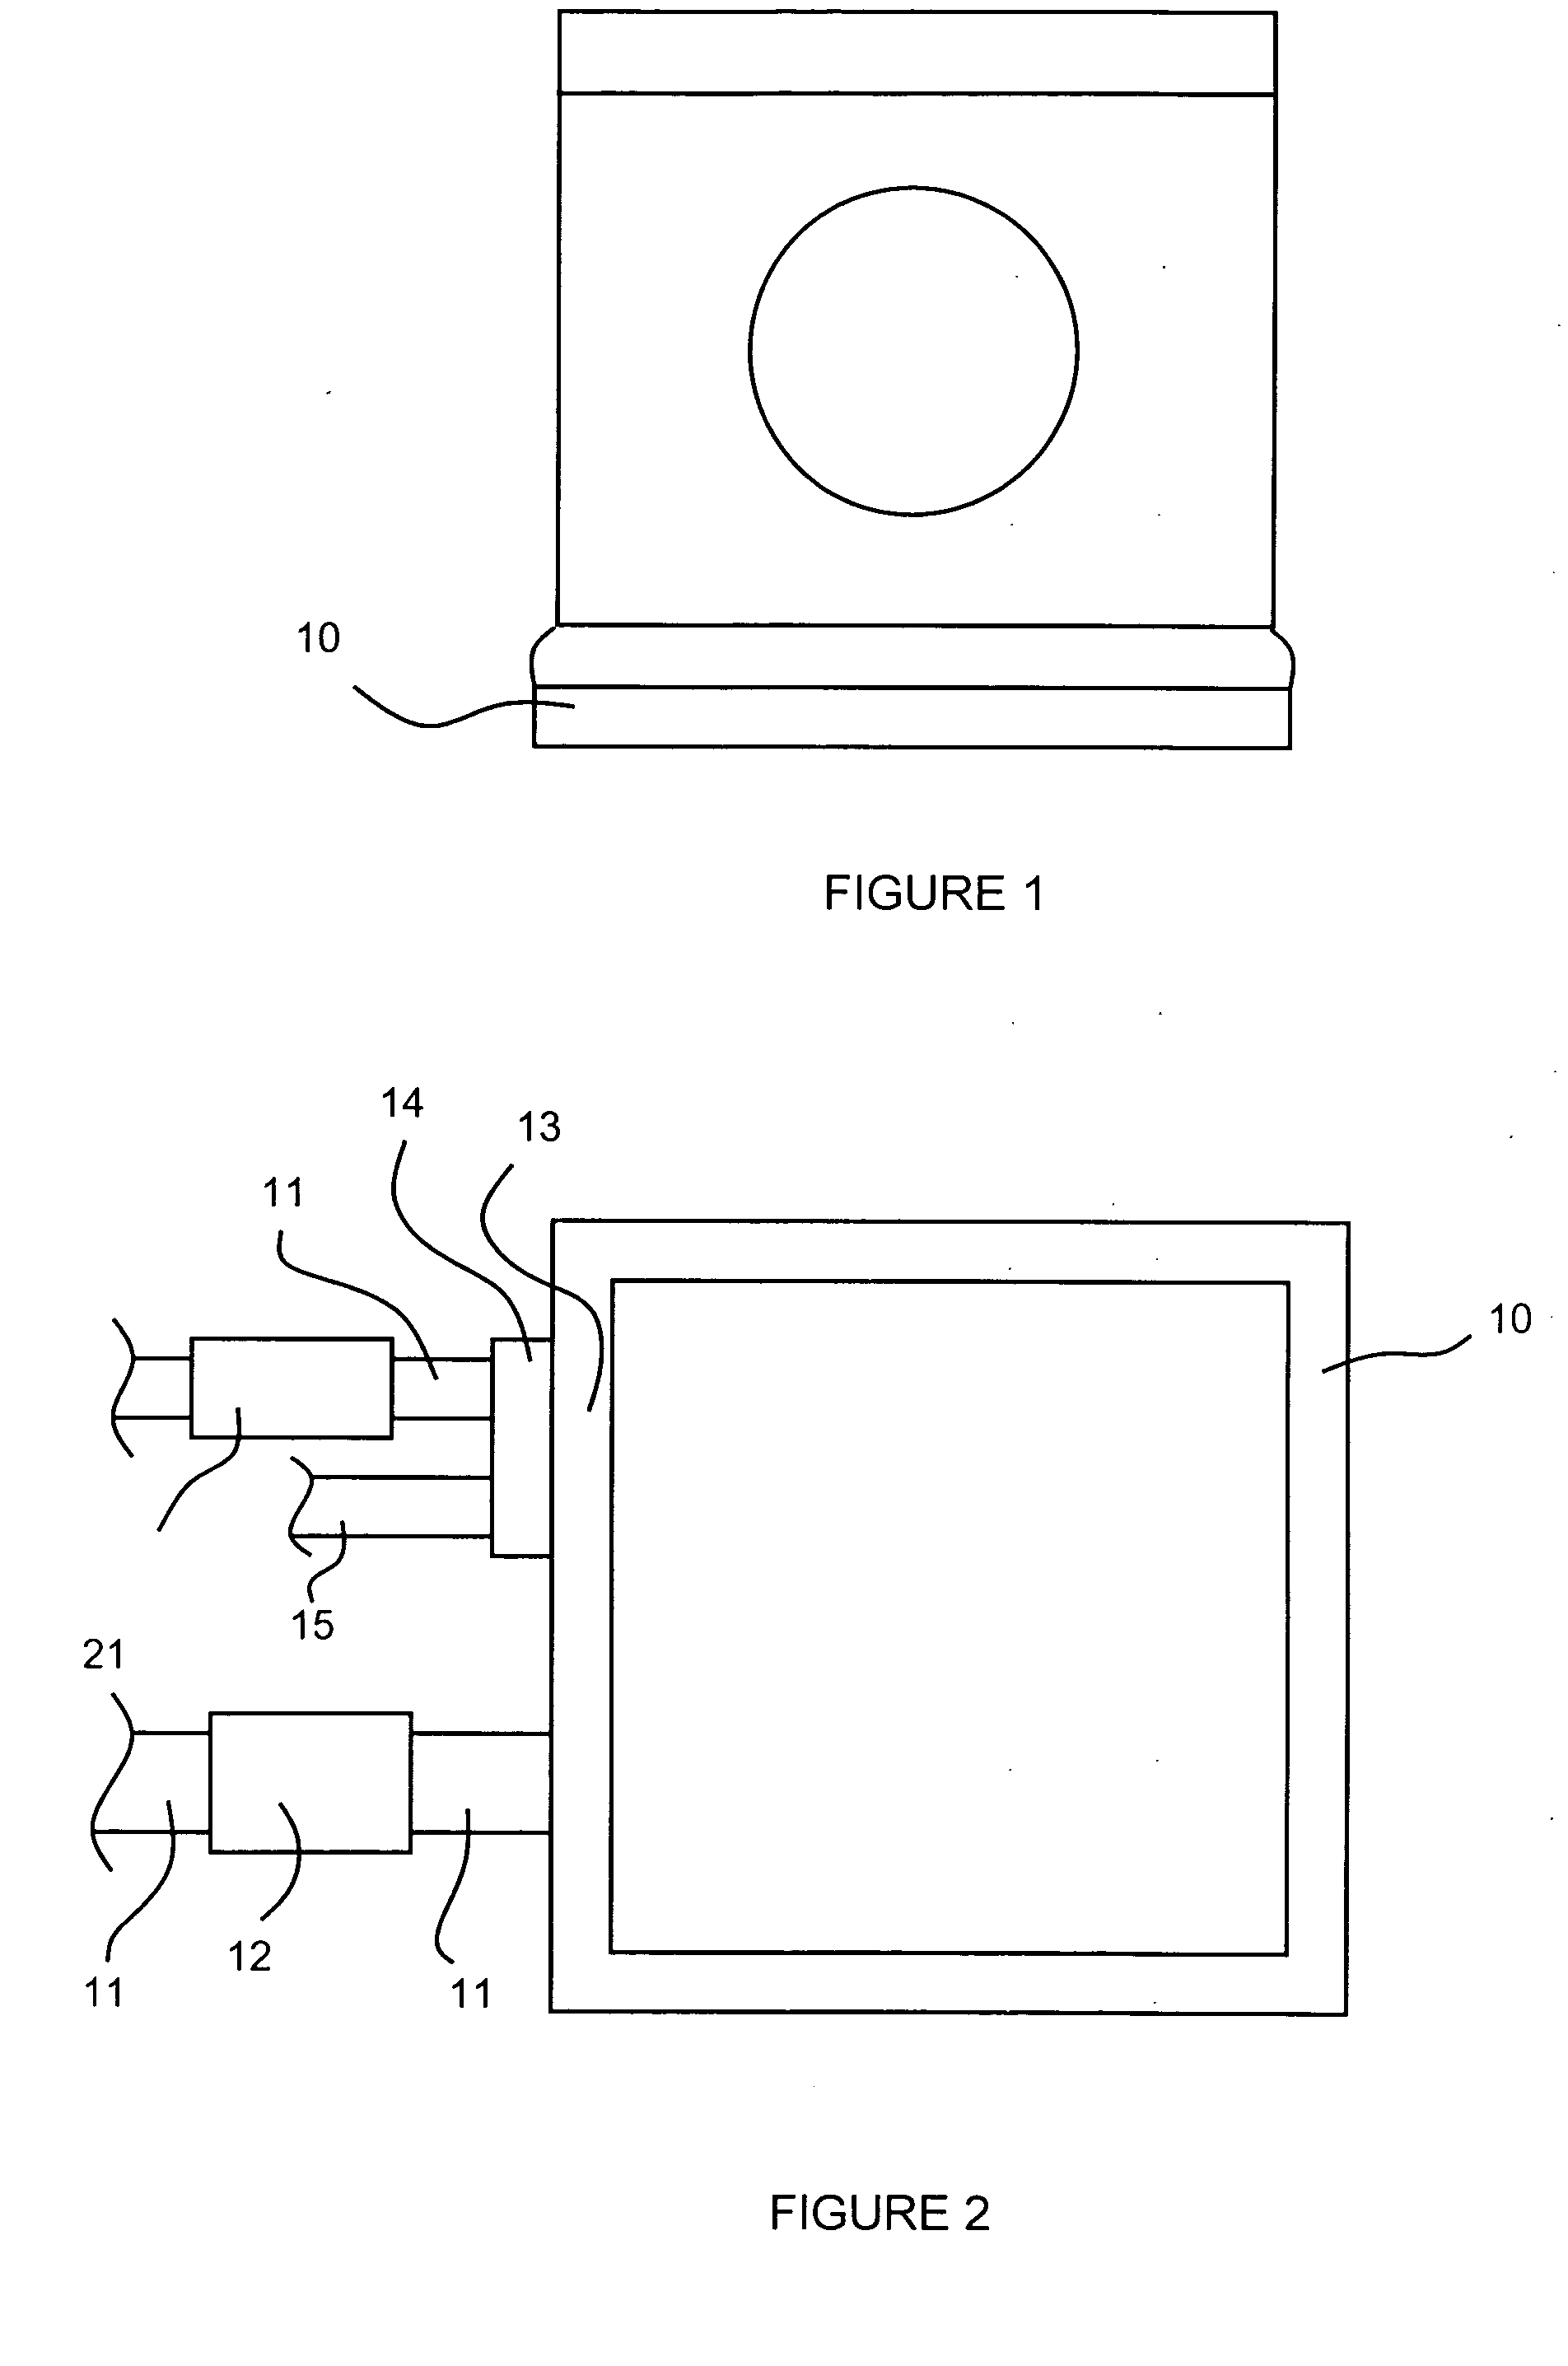 Apparatus and methods for improving the energy efficiency of dryer appliances